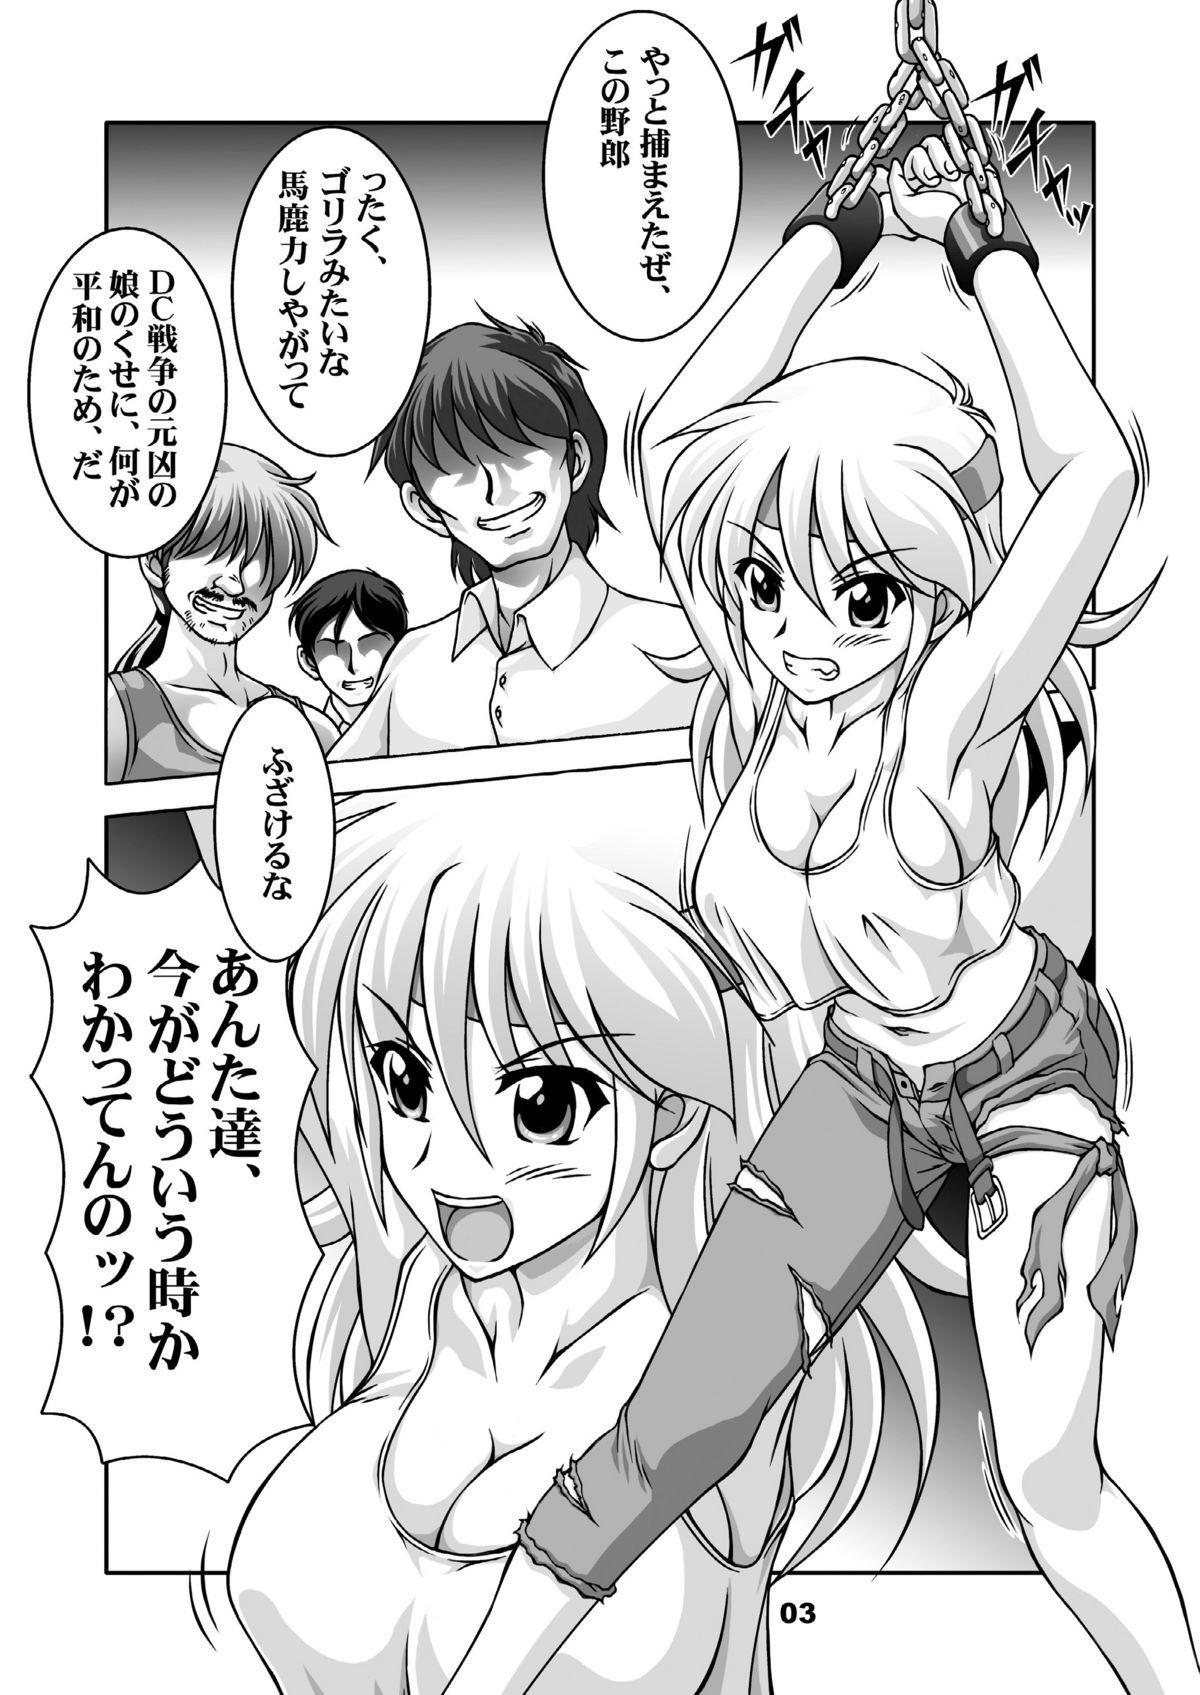 Transex BACK・ALLEY RYUNE - Super robot wars Fuck Com - Page 3